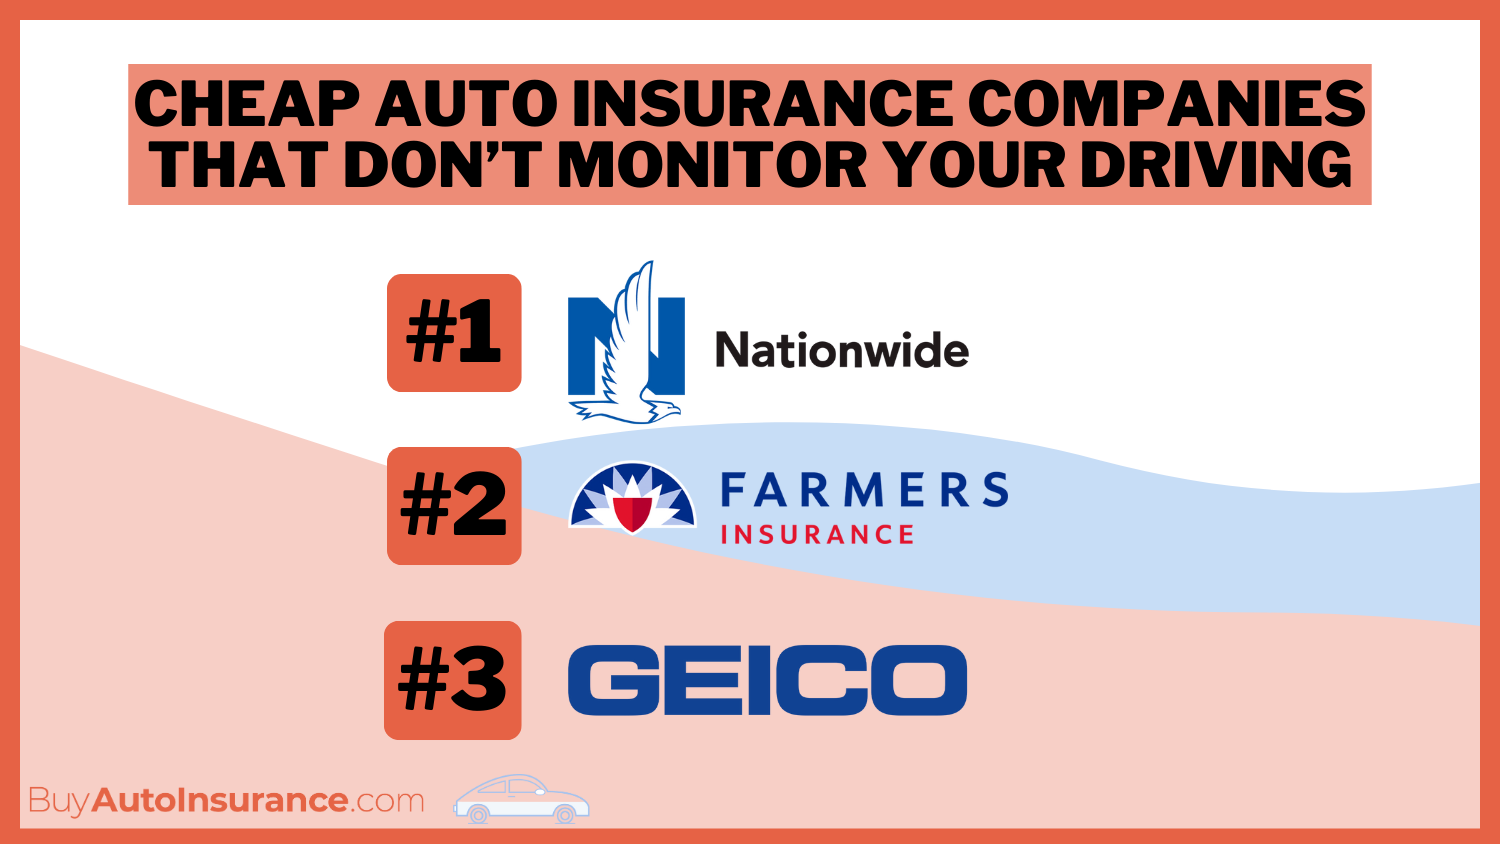 Cheap Auto Insurance Companies That Don't Monitor Your Driving: Nationwide, Farmers, and Geico